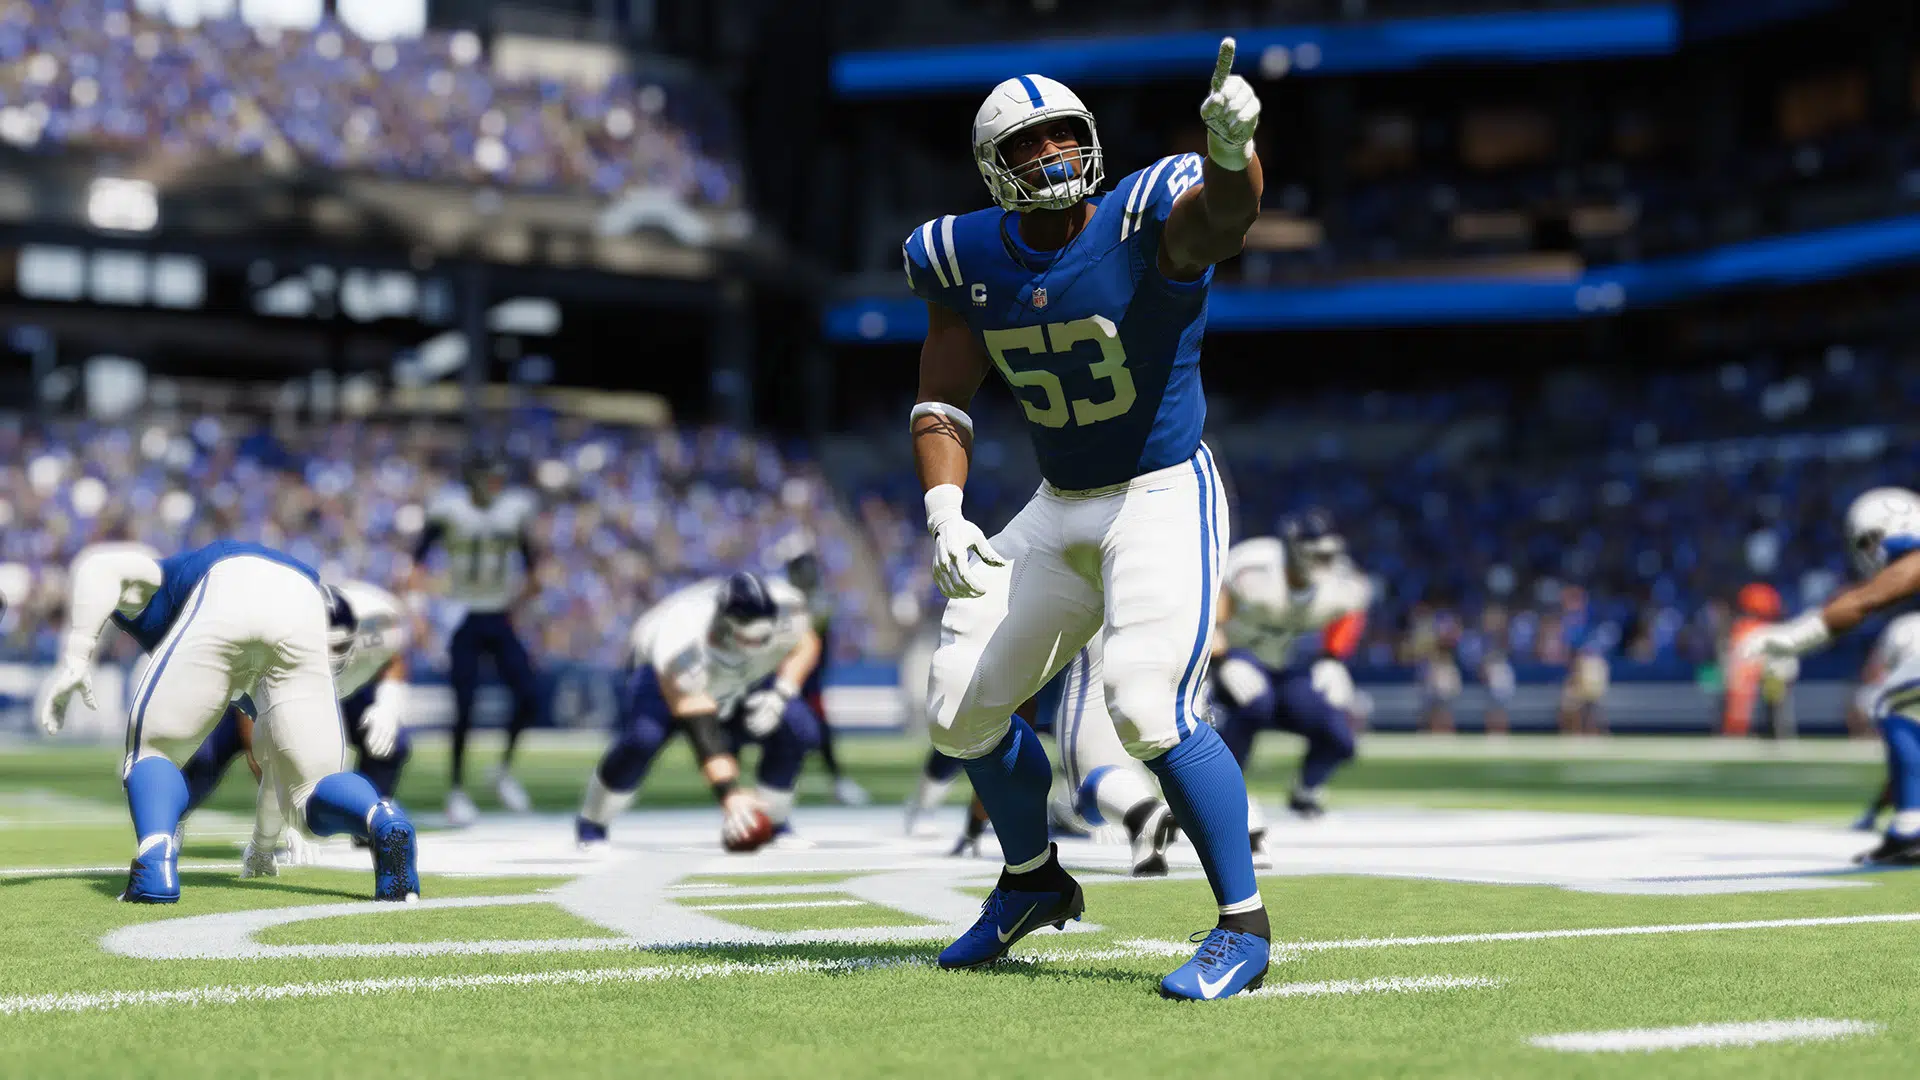 Madden 23 Update 1.16 Patch Notes